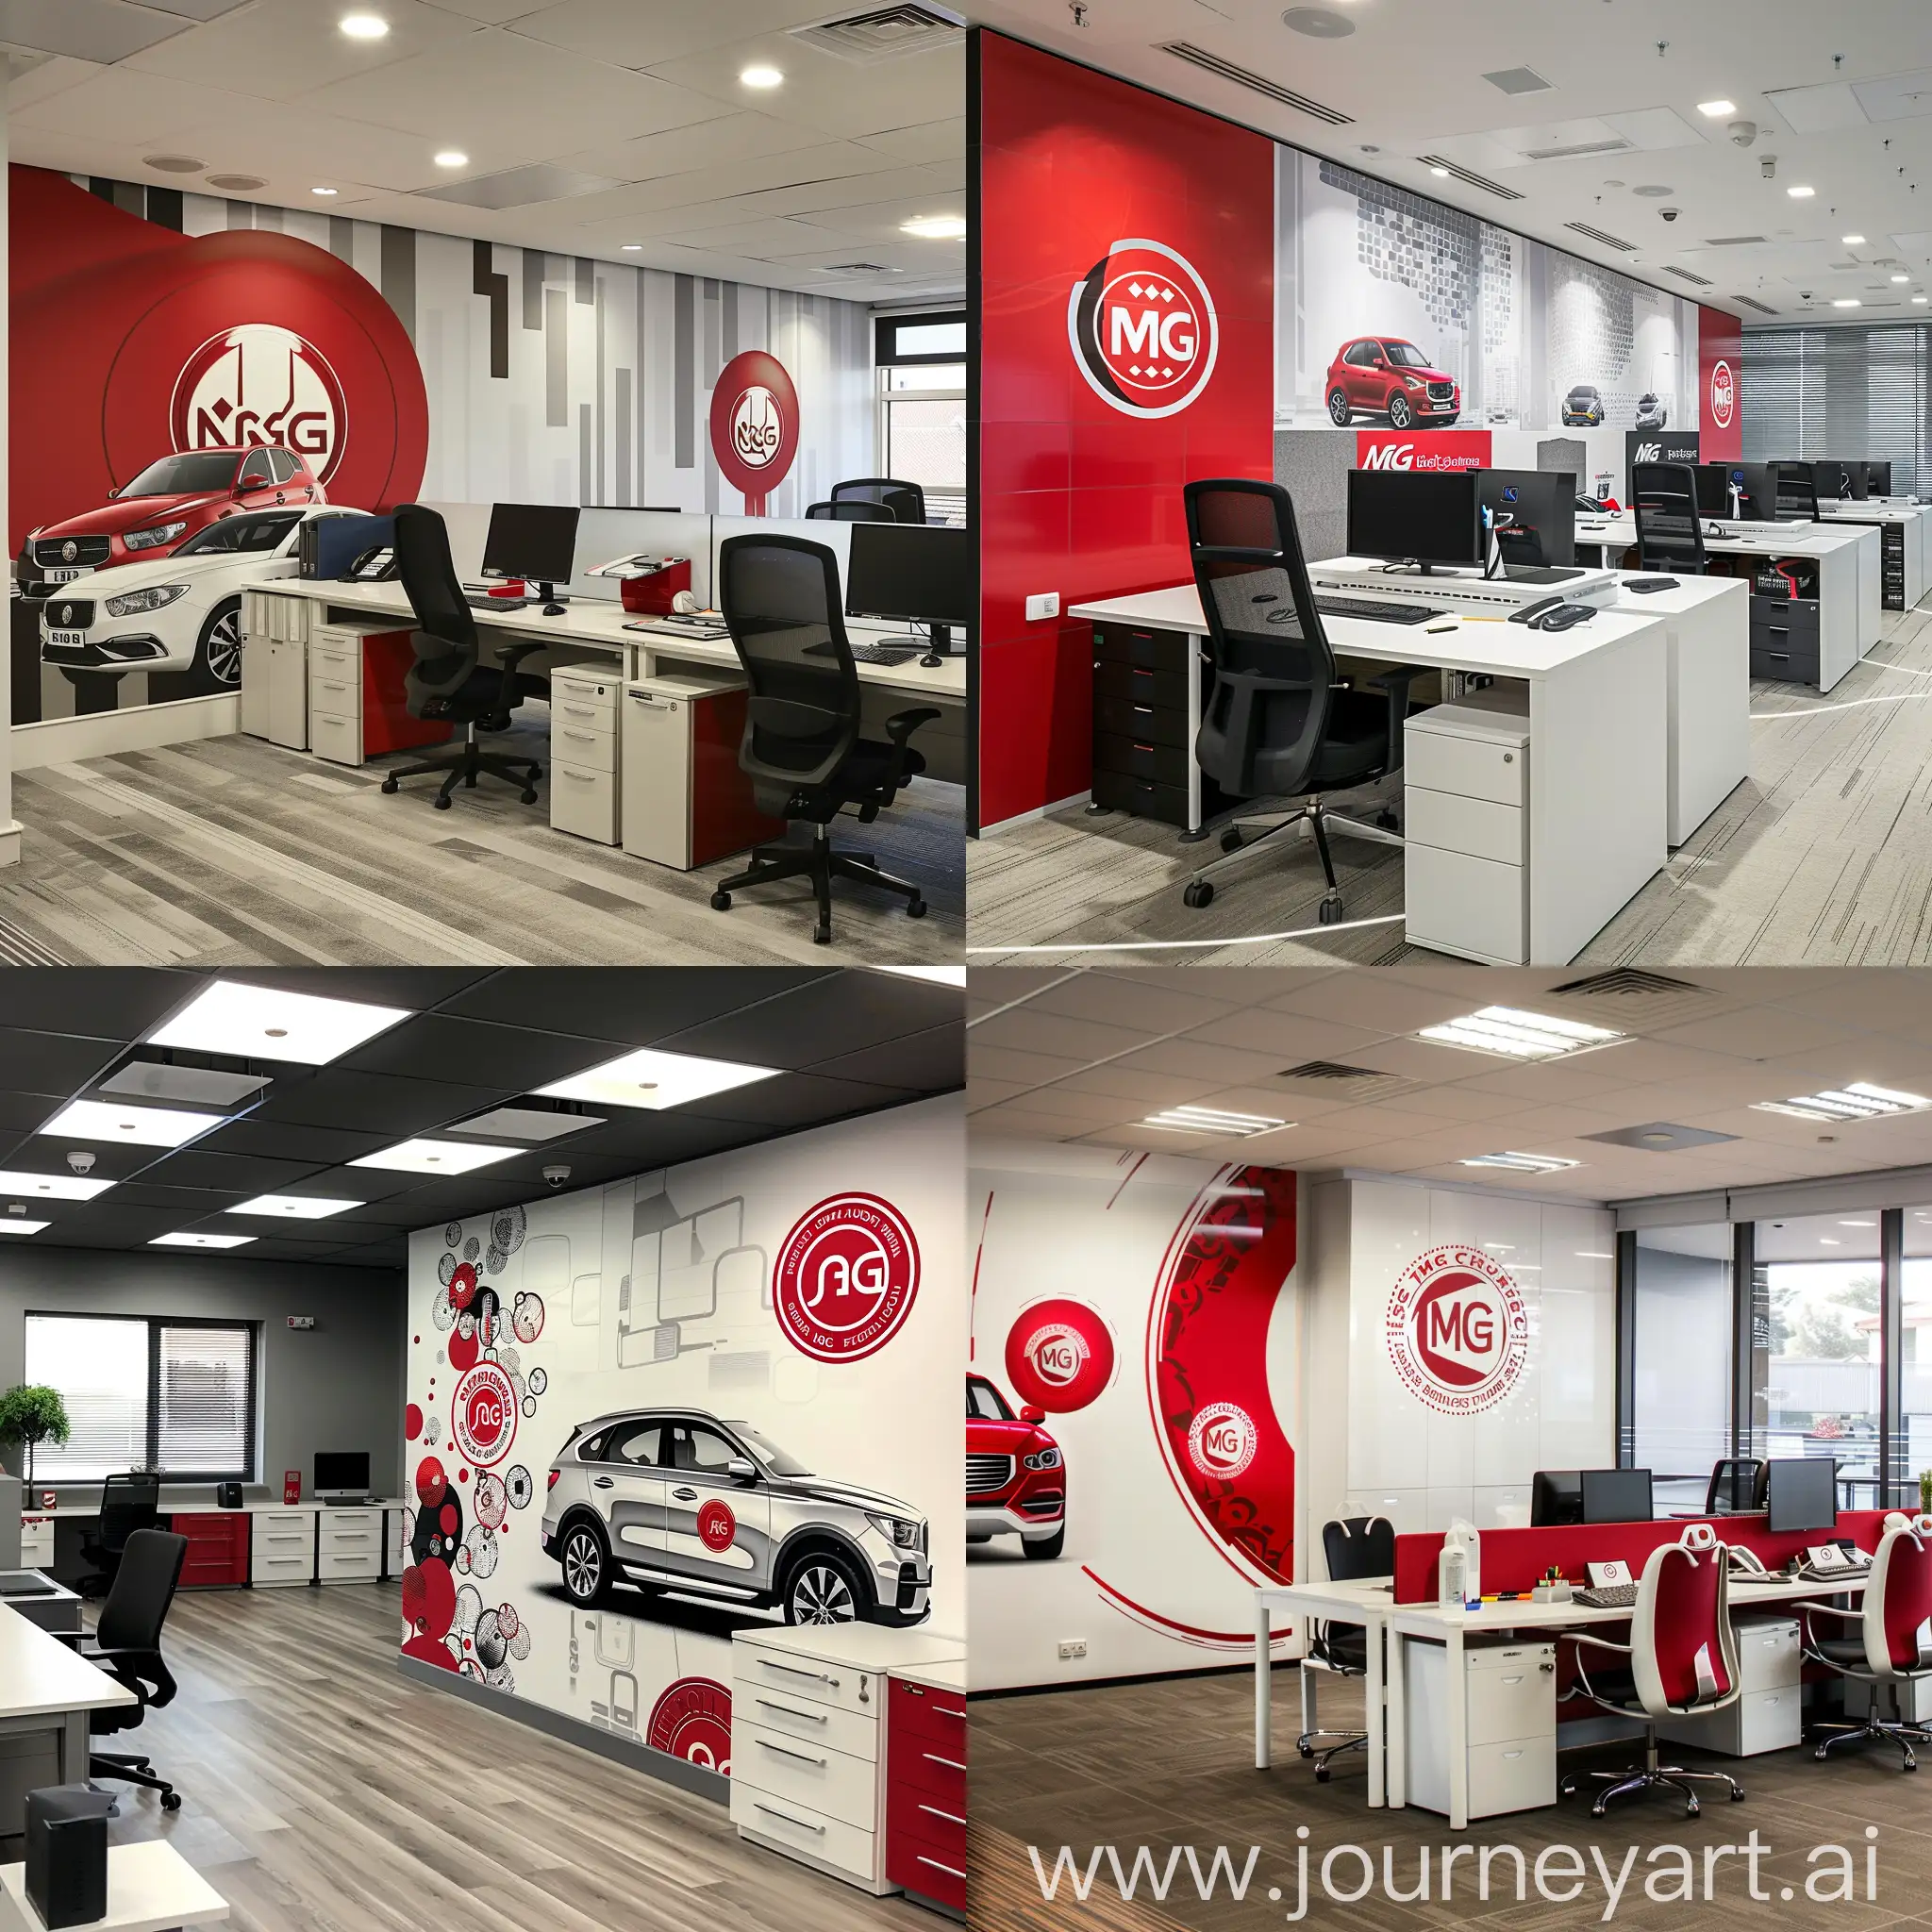 Office interior with MG motor branding, wall stickers in red and white, elegant designs